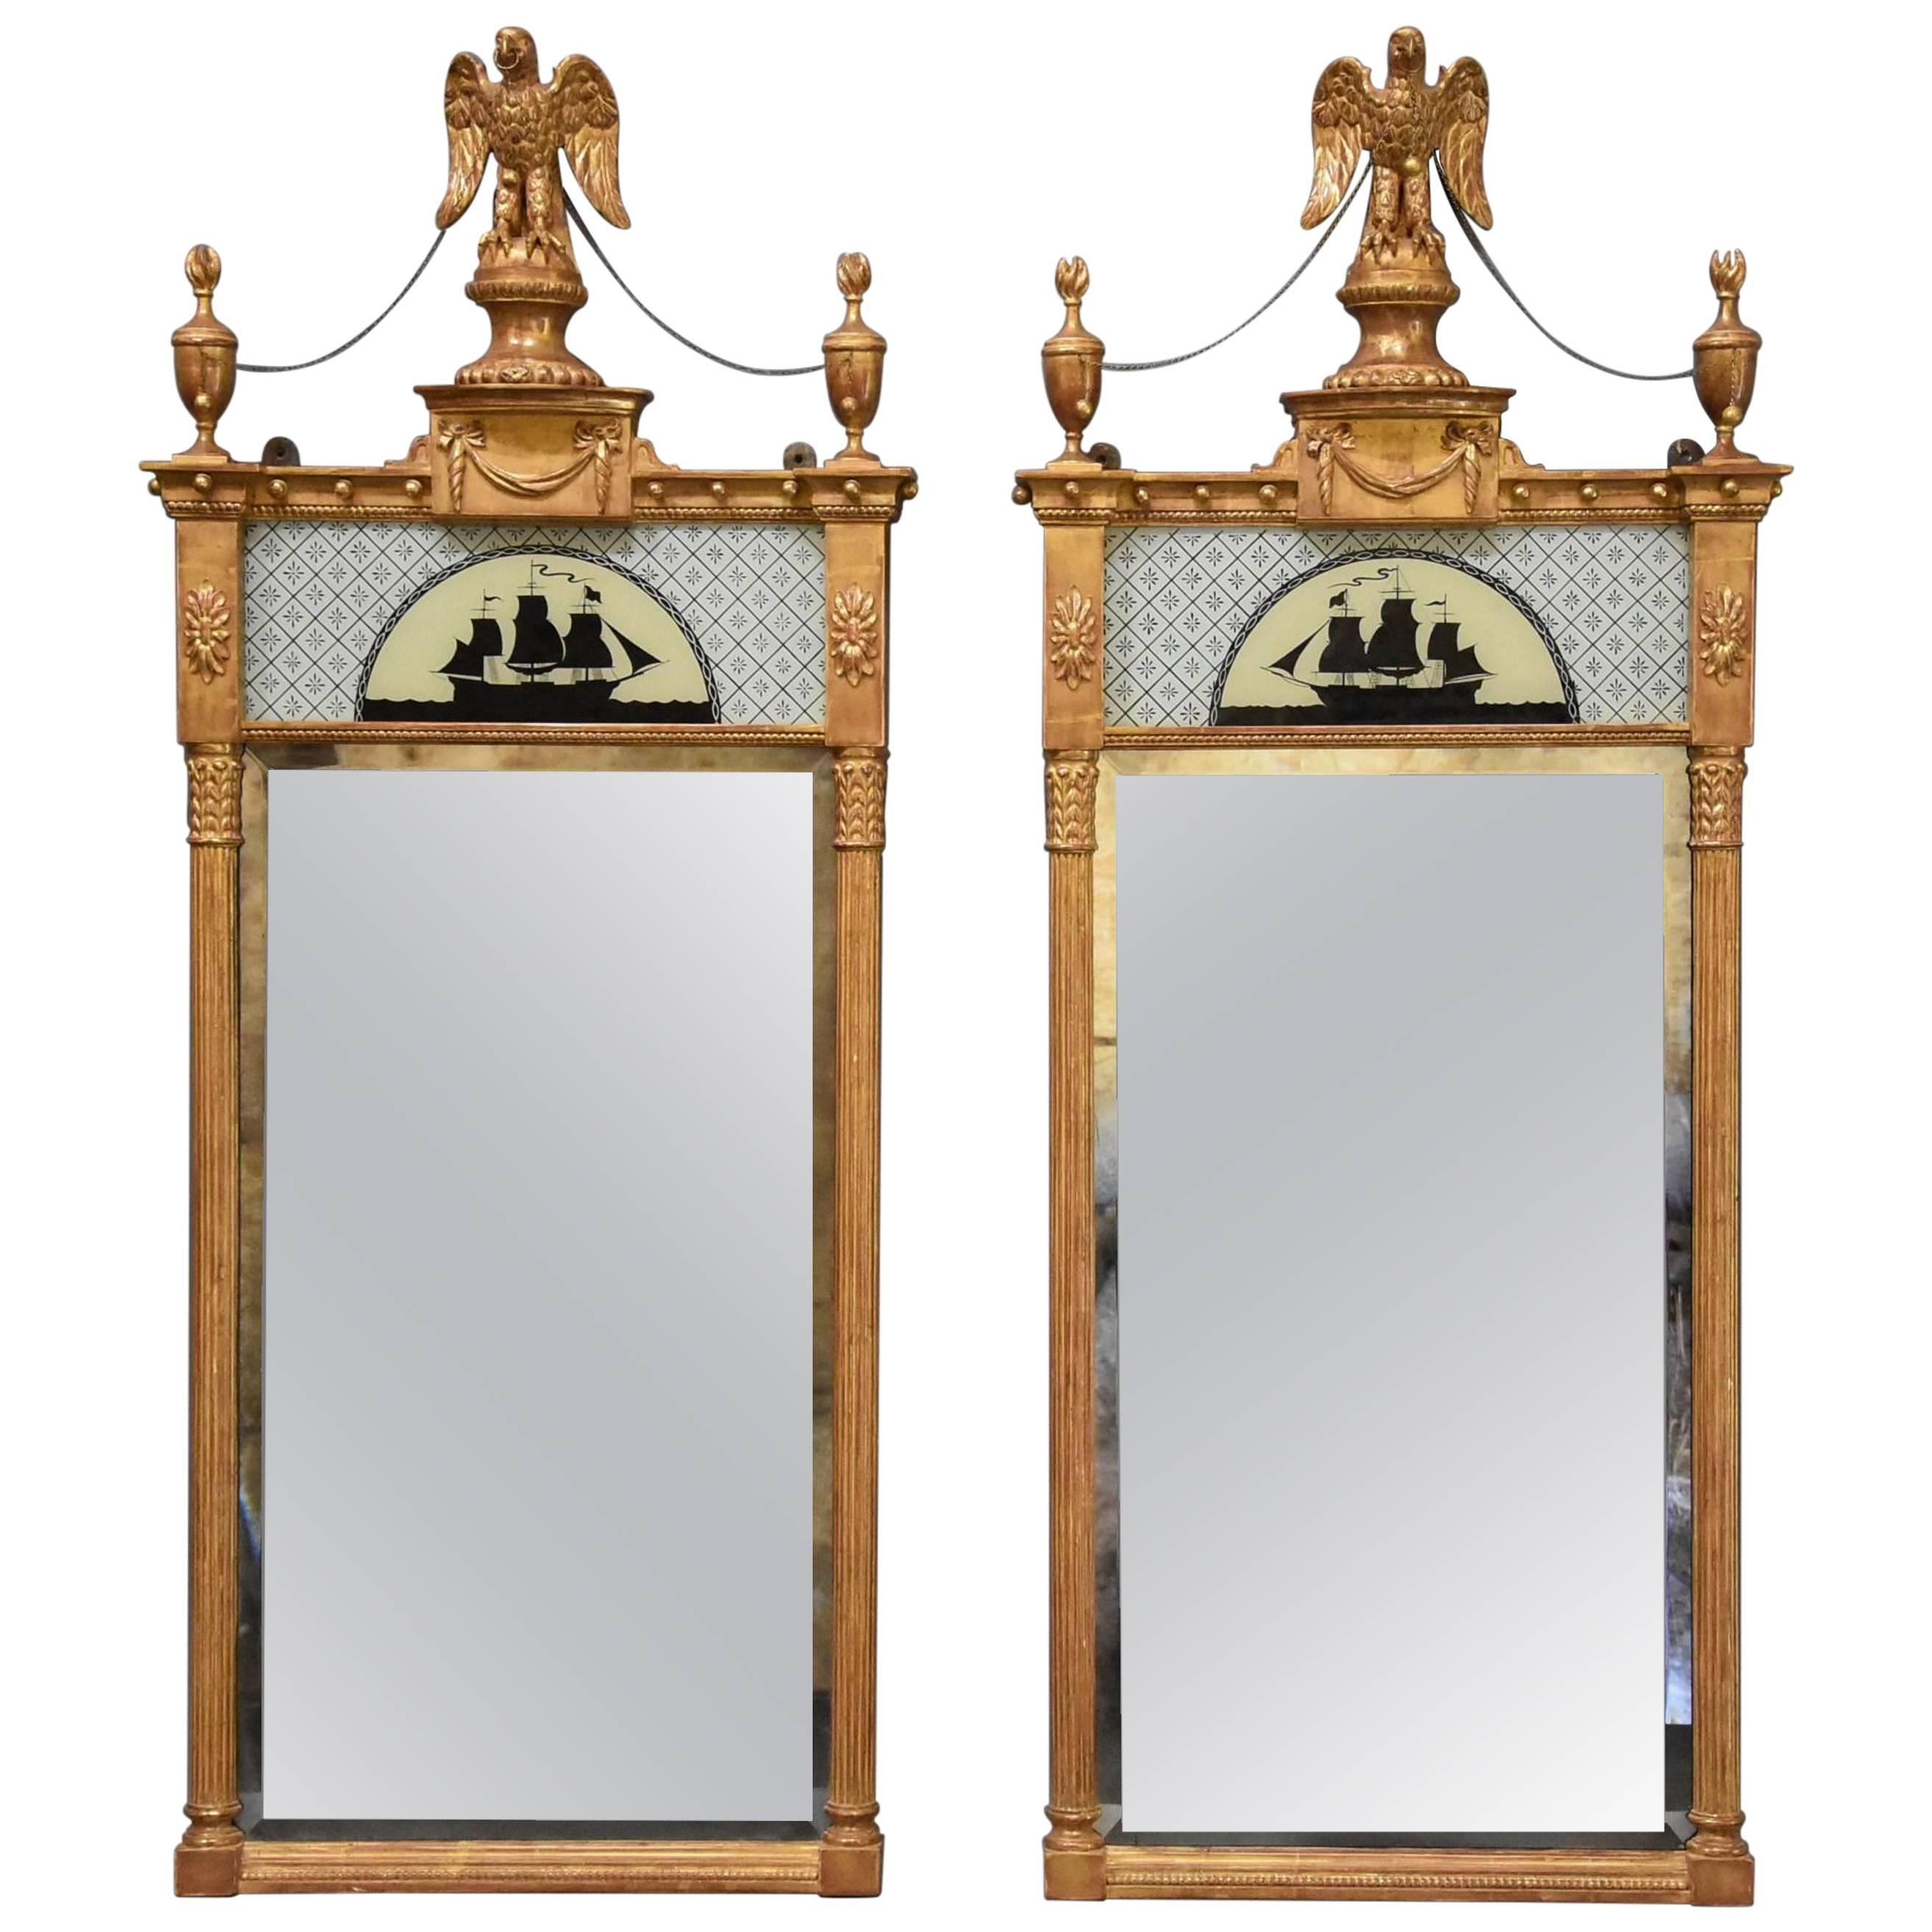 Superb Pair of Carved Giltwood Pier Mirrors in the Regency Style